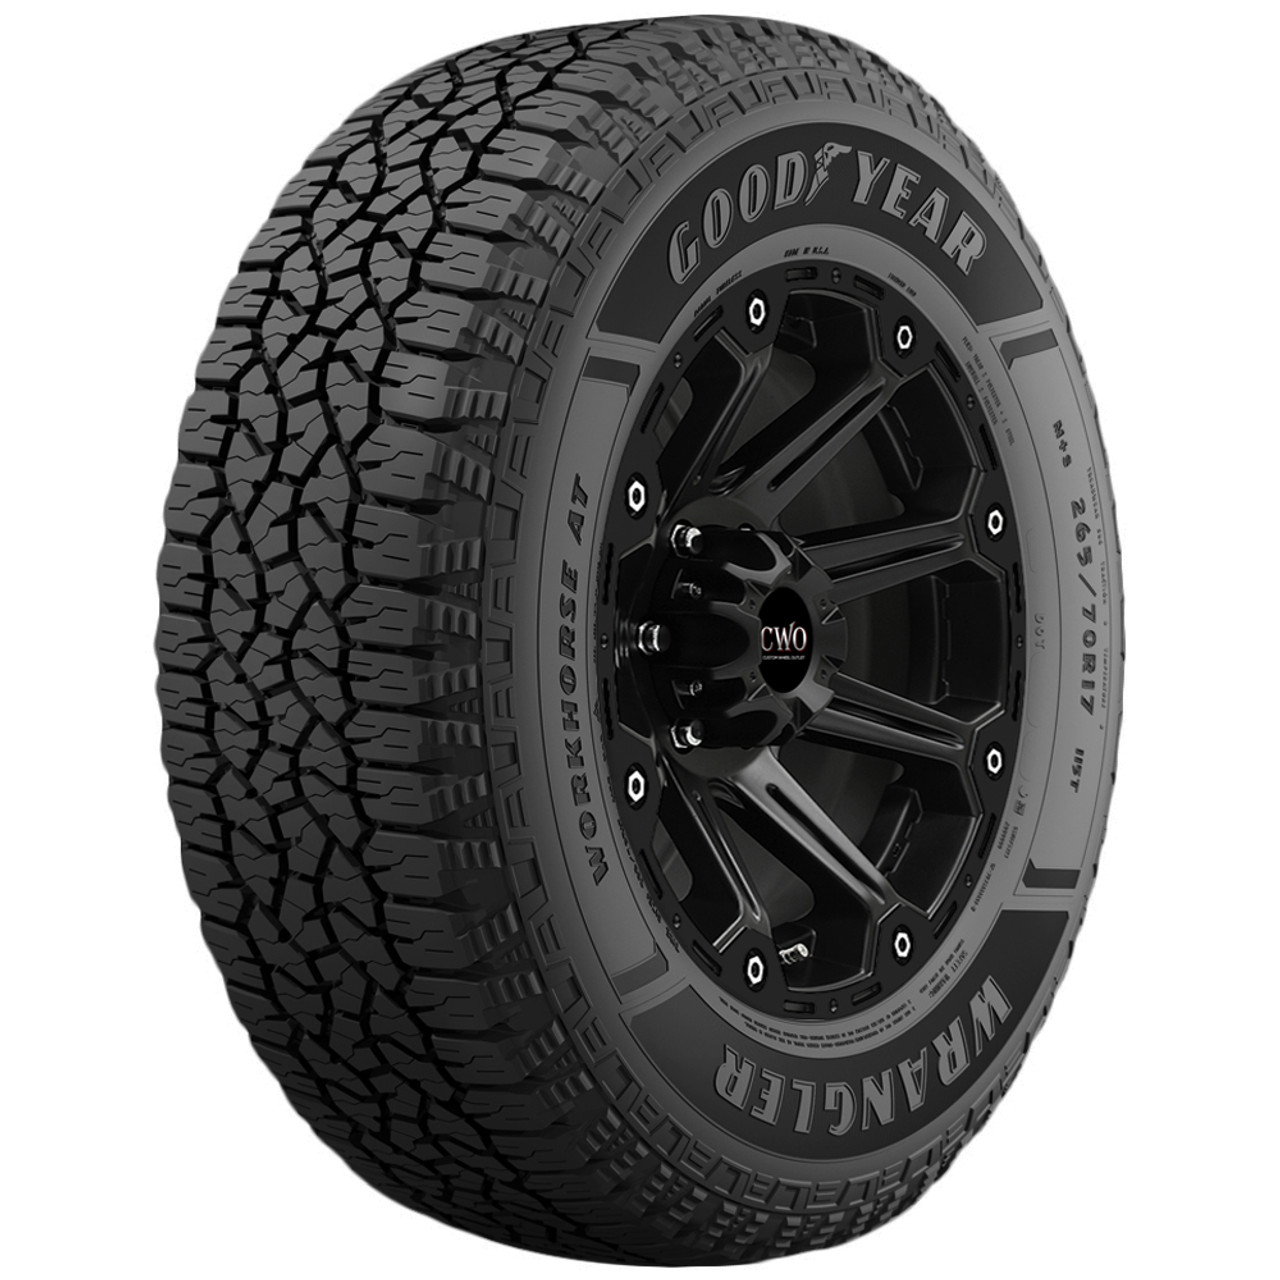 275/65R18 Goodyear Wrangler Workhorse AT 116T SL/4 Ply Tire 480066856 -  ShopCWO